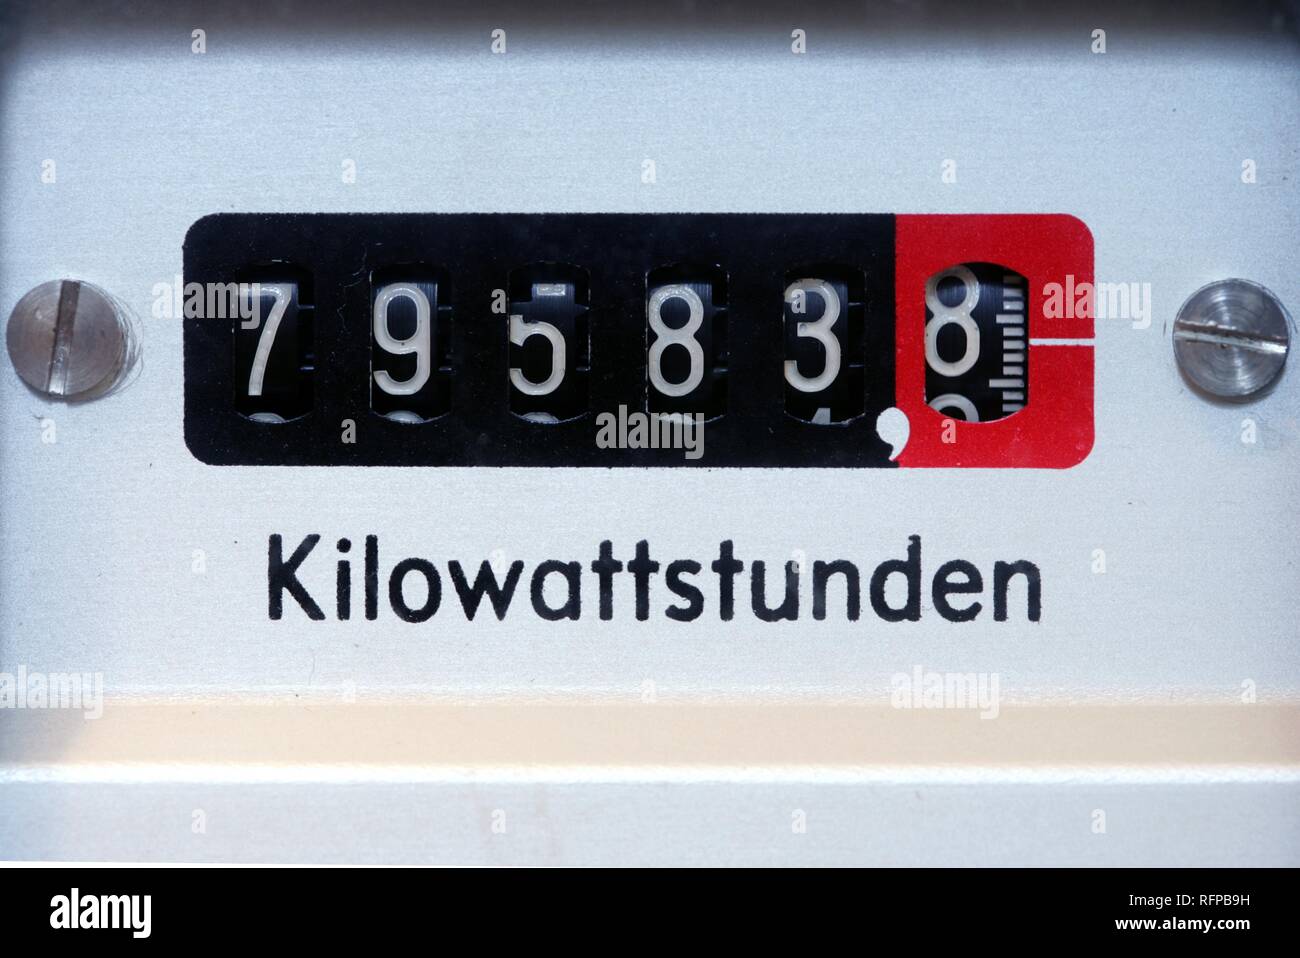 DEU, Germany : Electricity meter in a private house. Stock Photo